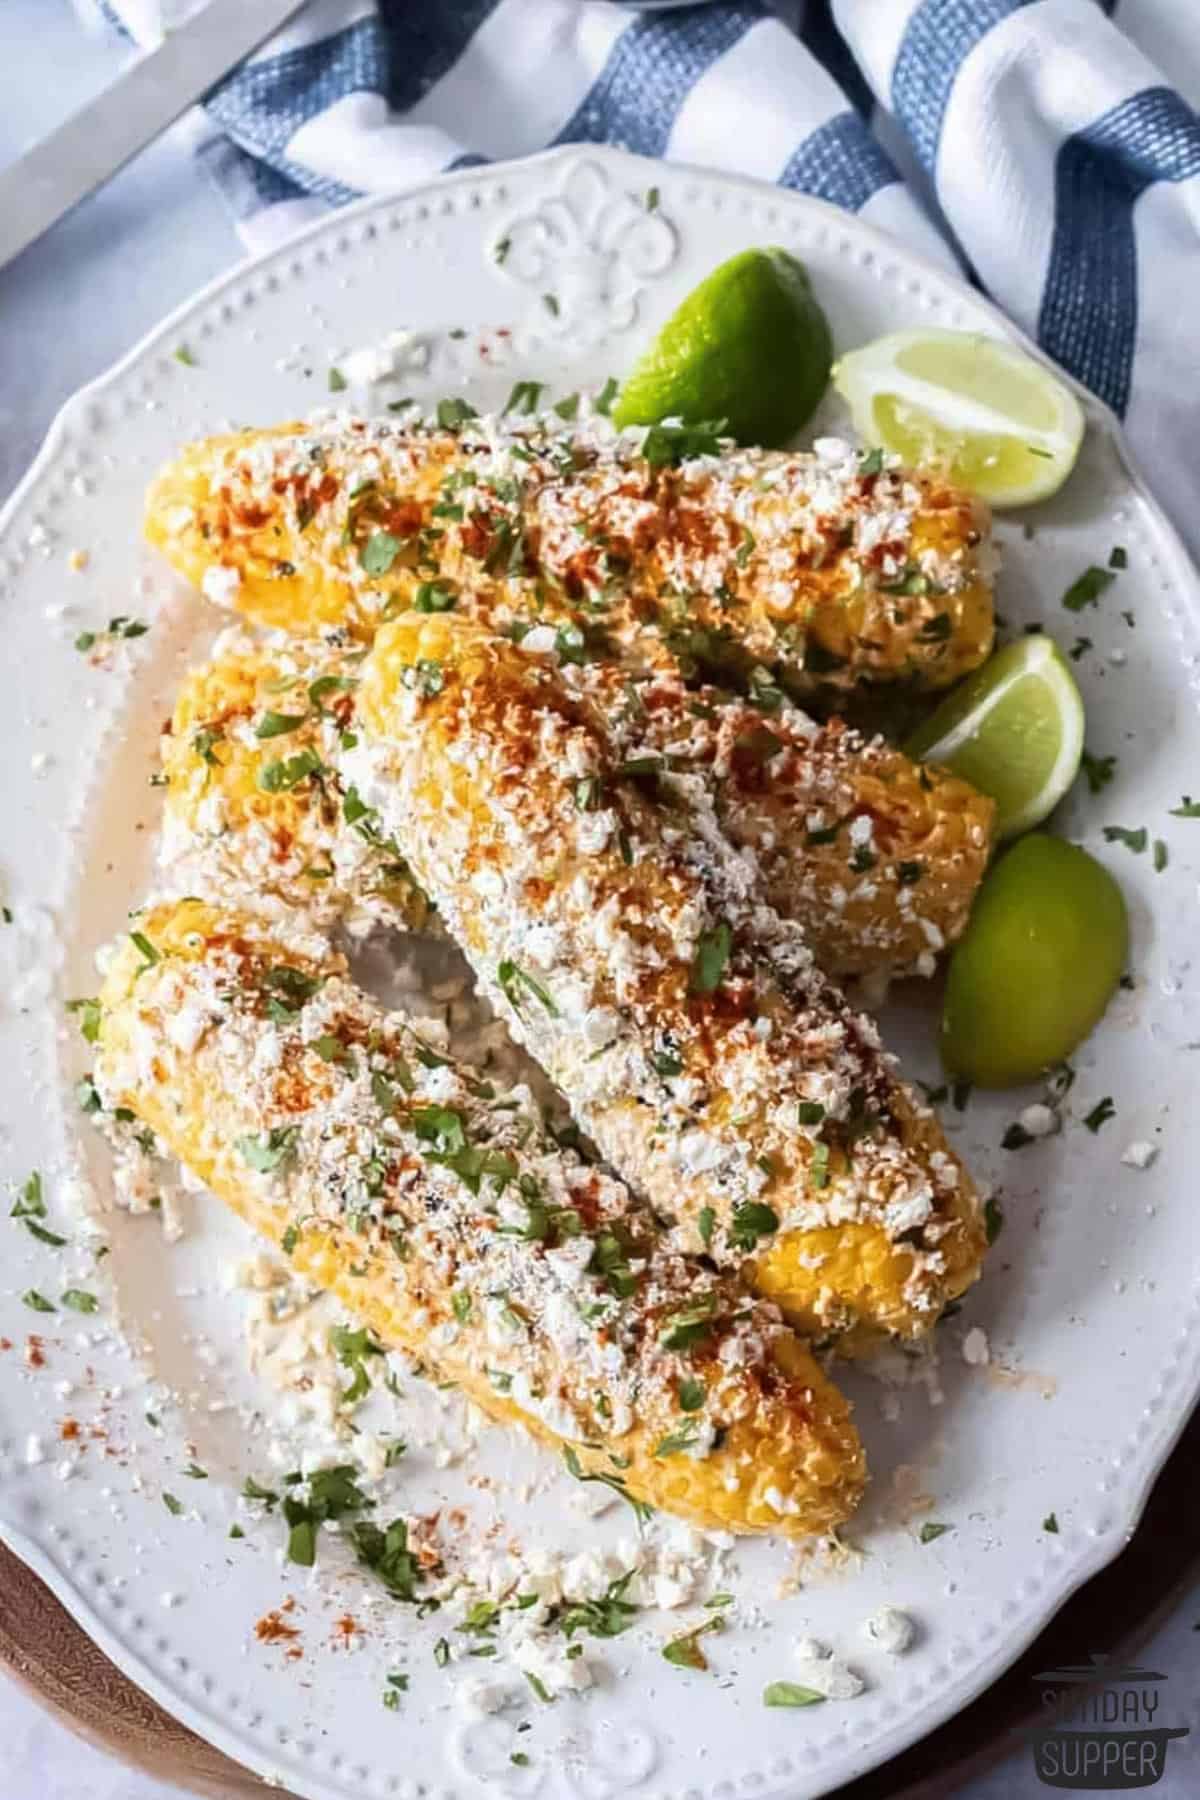 cheese and cilantro sprinkled on the corn and ready to serve with limes